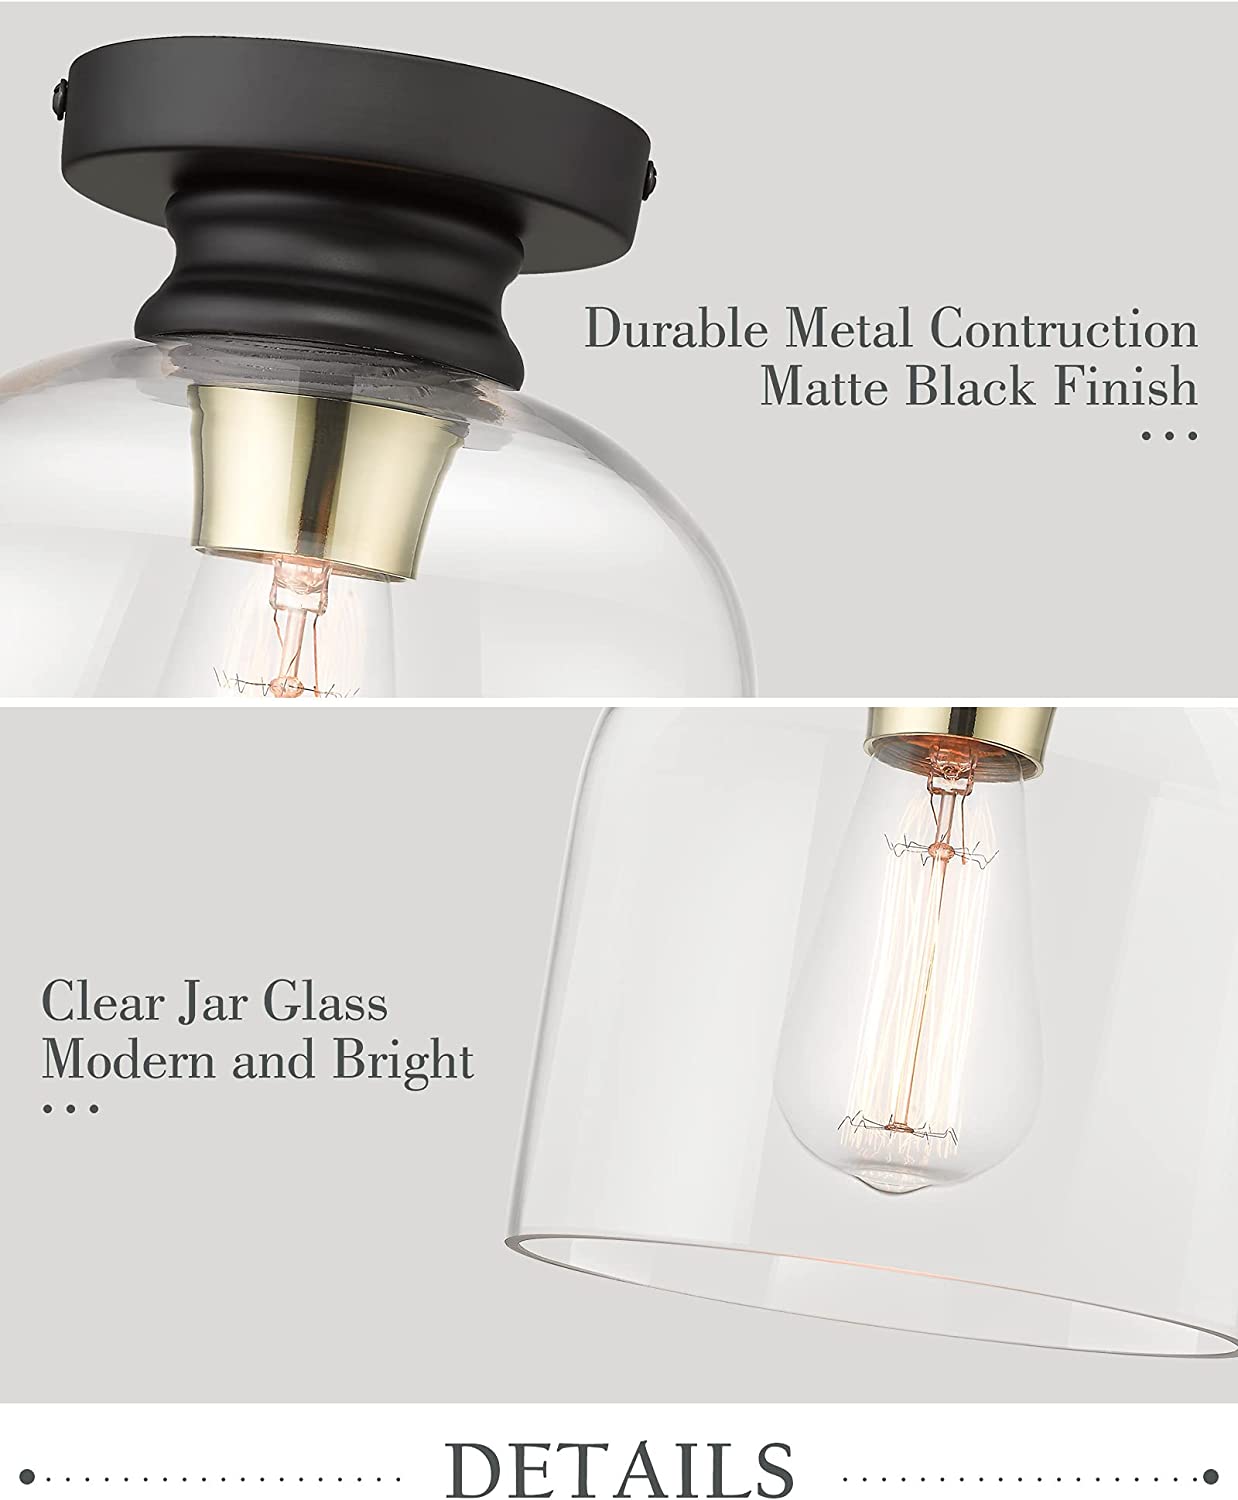 Black semi flush mount ceiling light industrial close to ceiling lamp fixture with glass shade